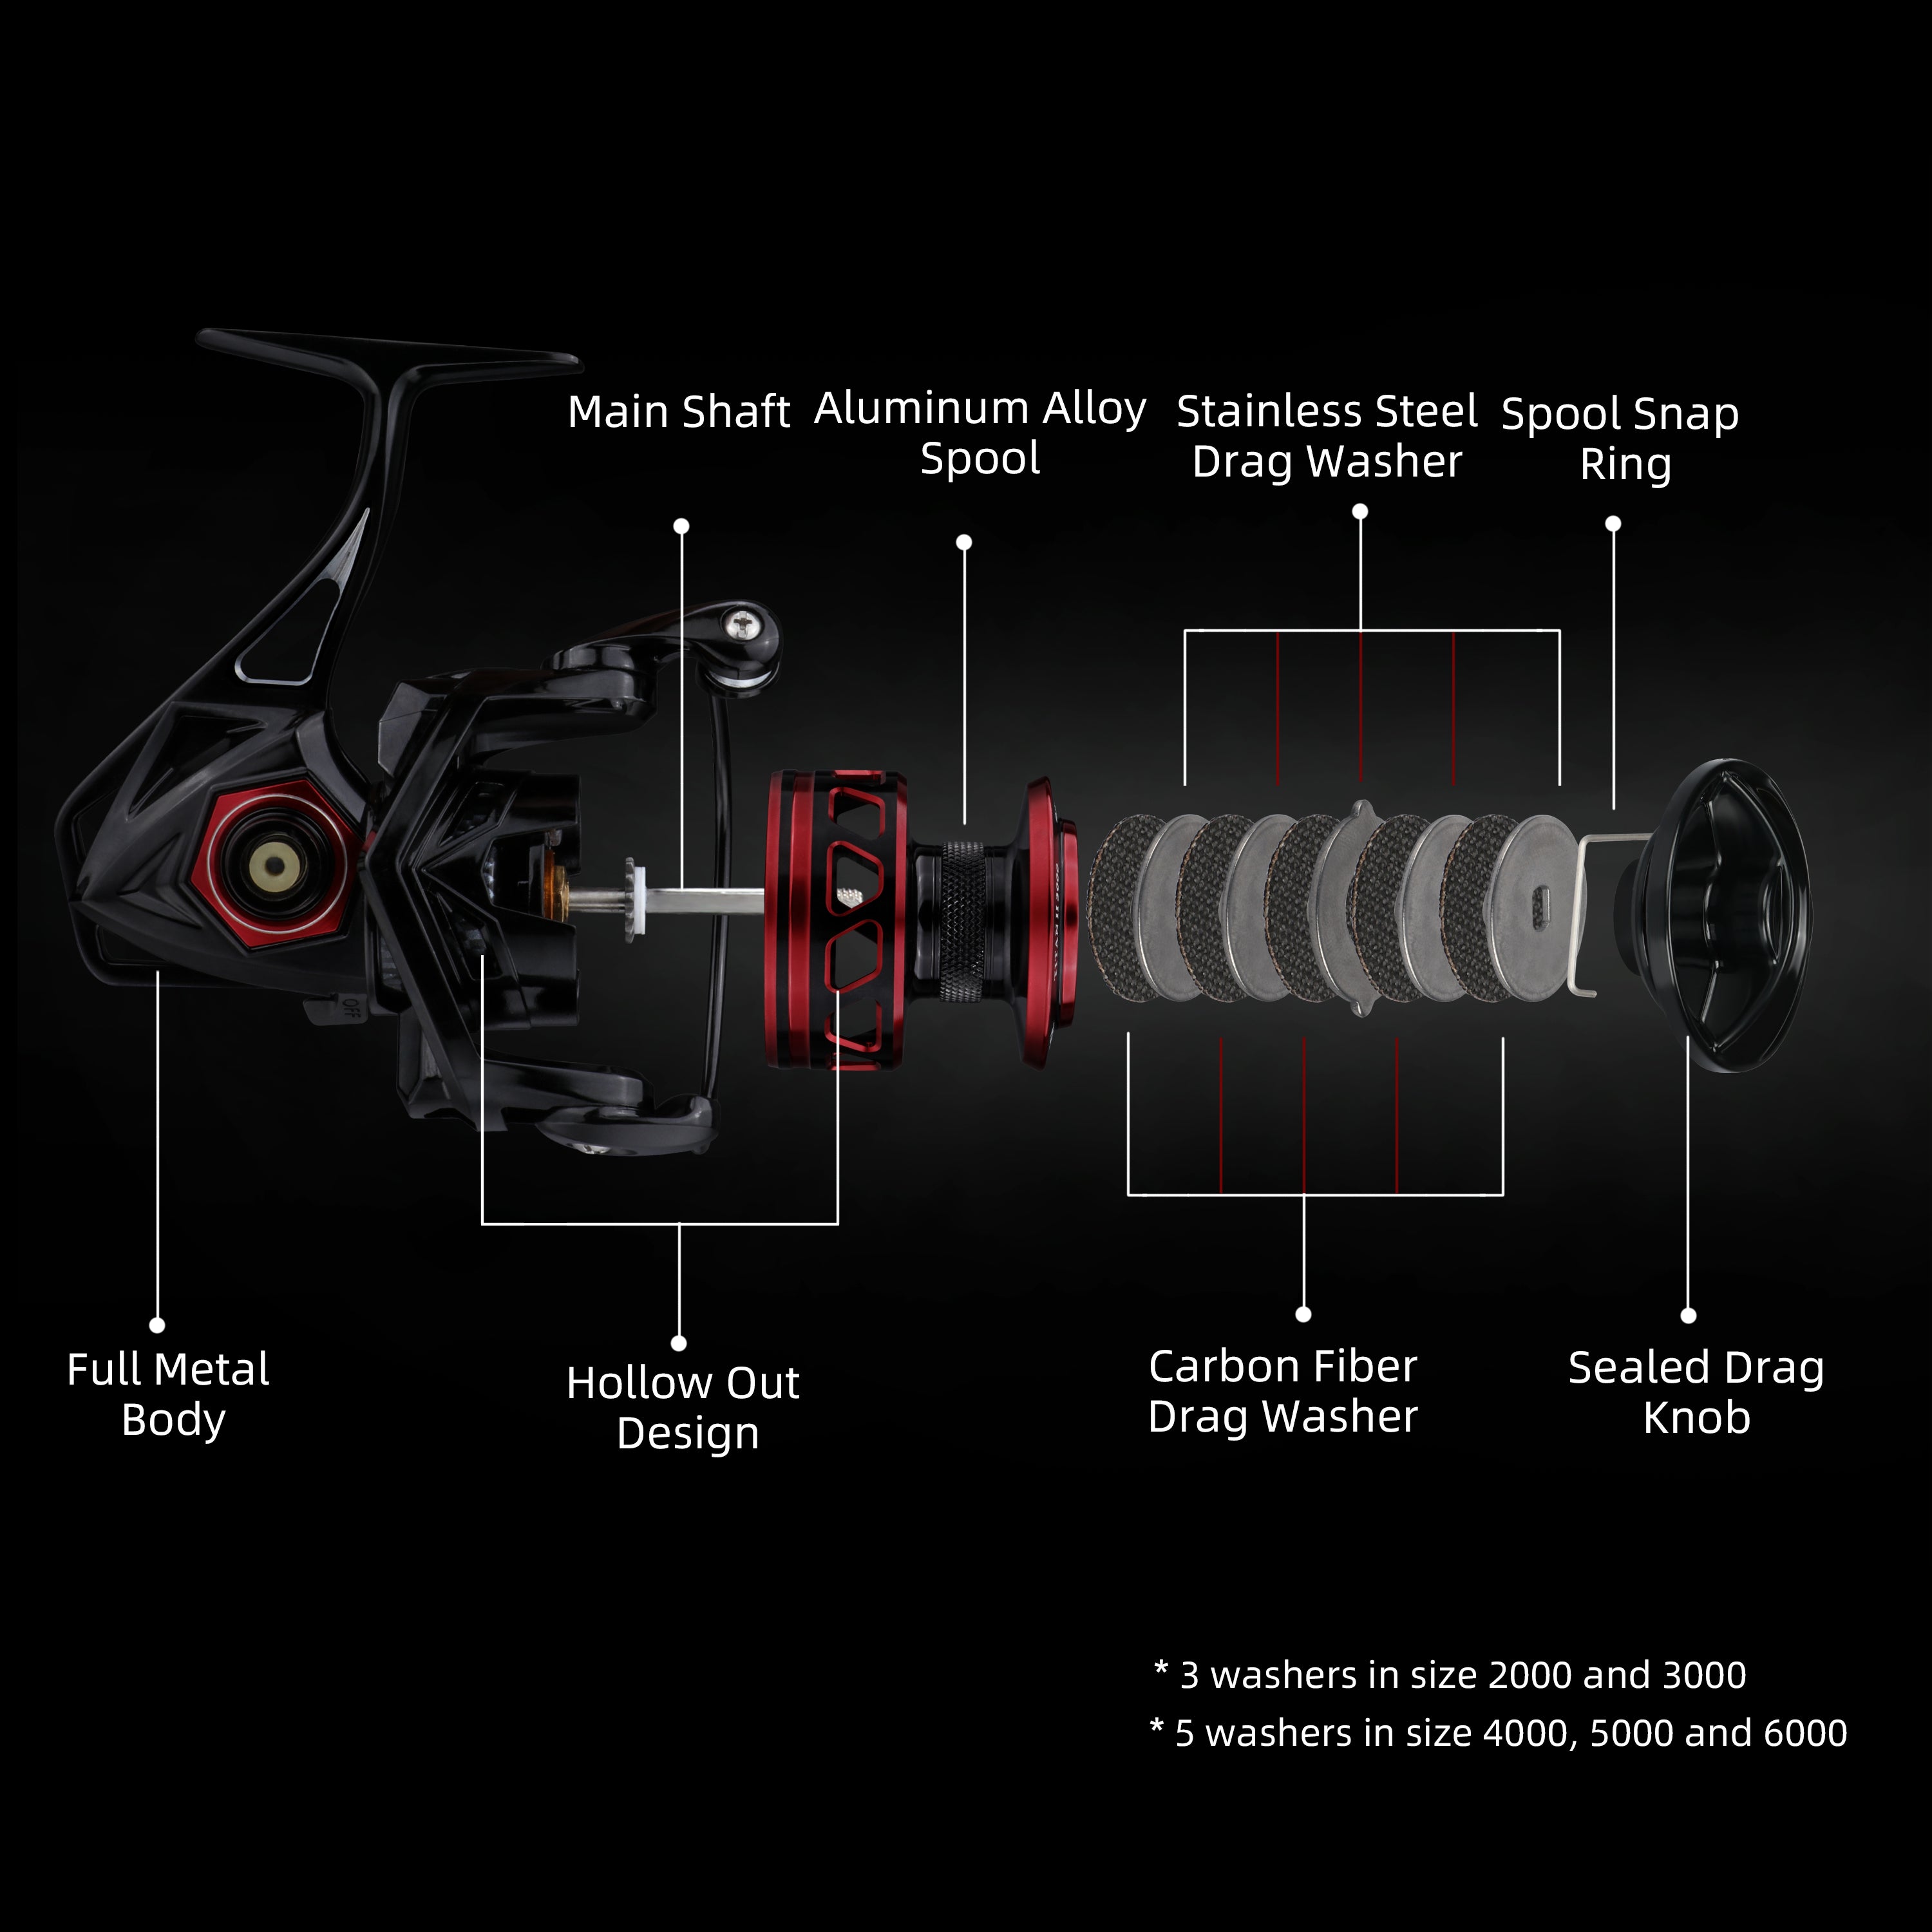 Spinning Reel 101 - What Are The Visible Parts Of A Spinning Reel (upd –  Runcl